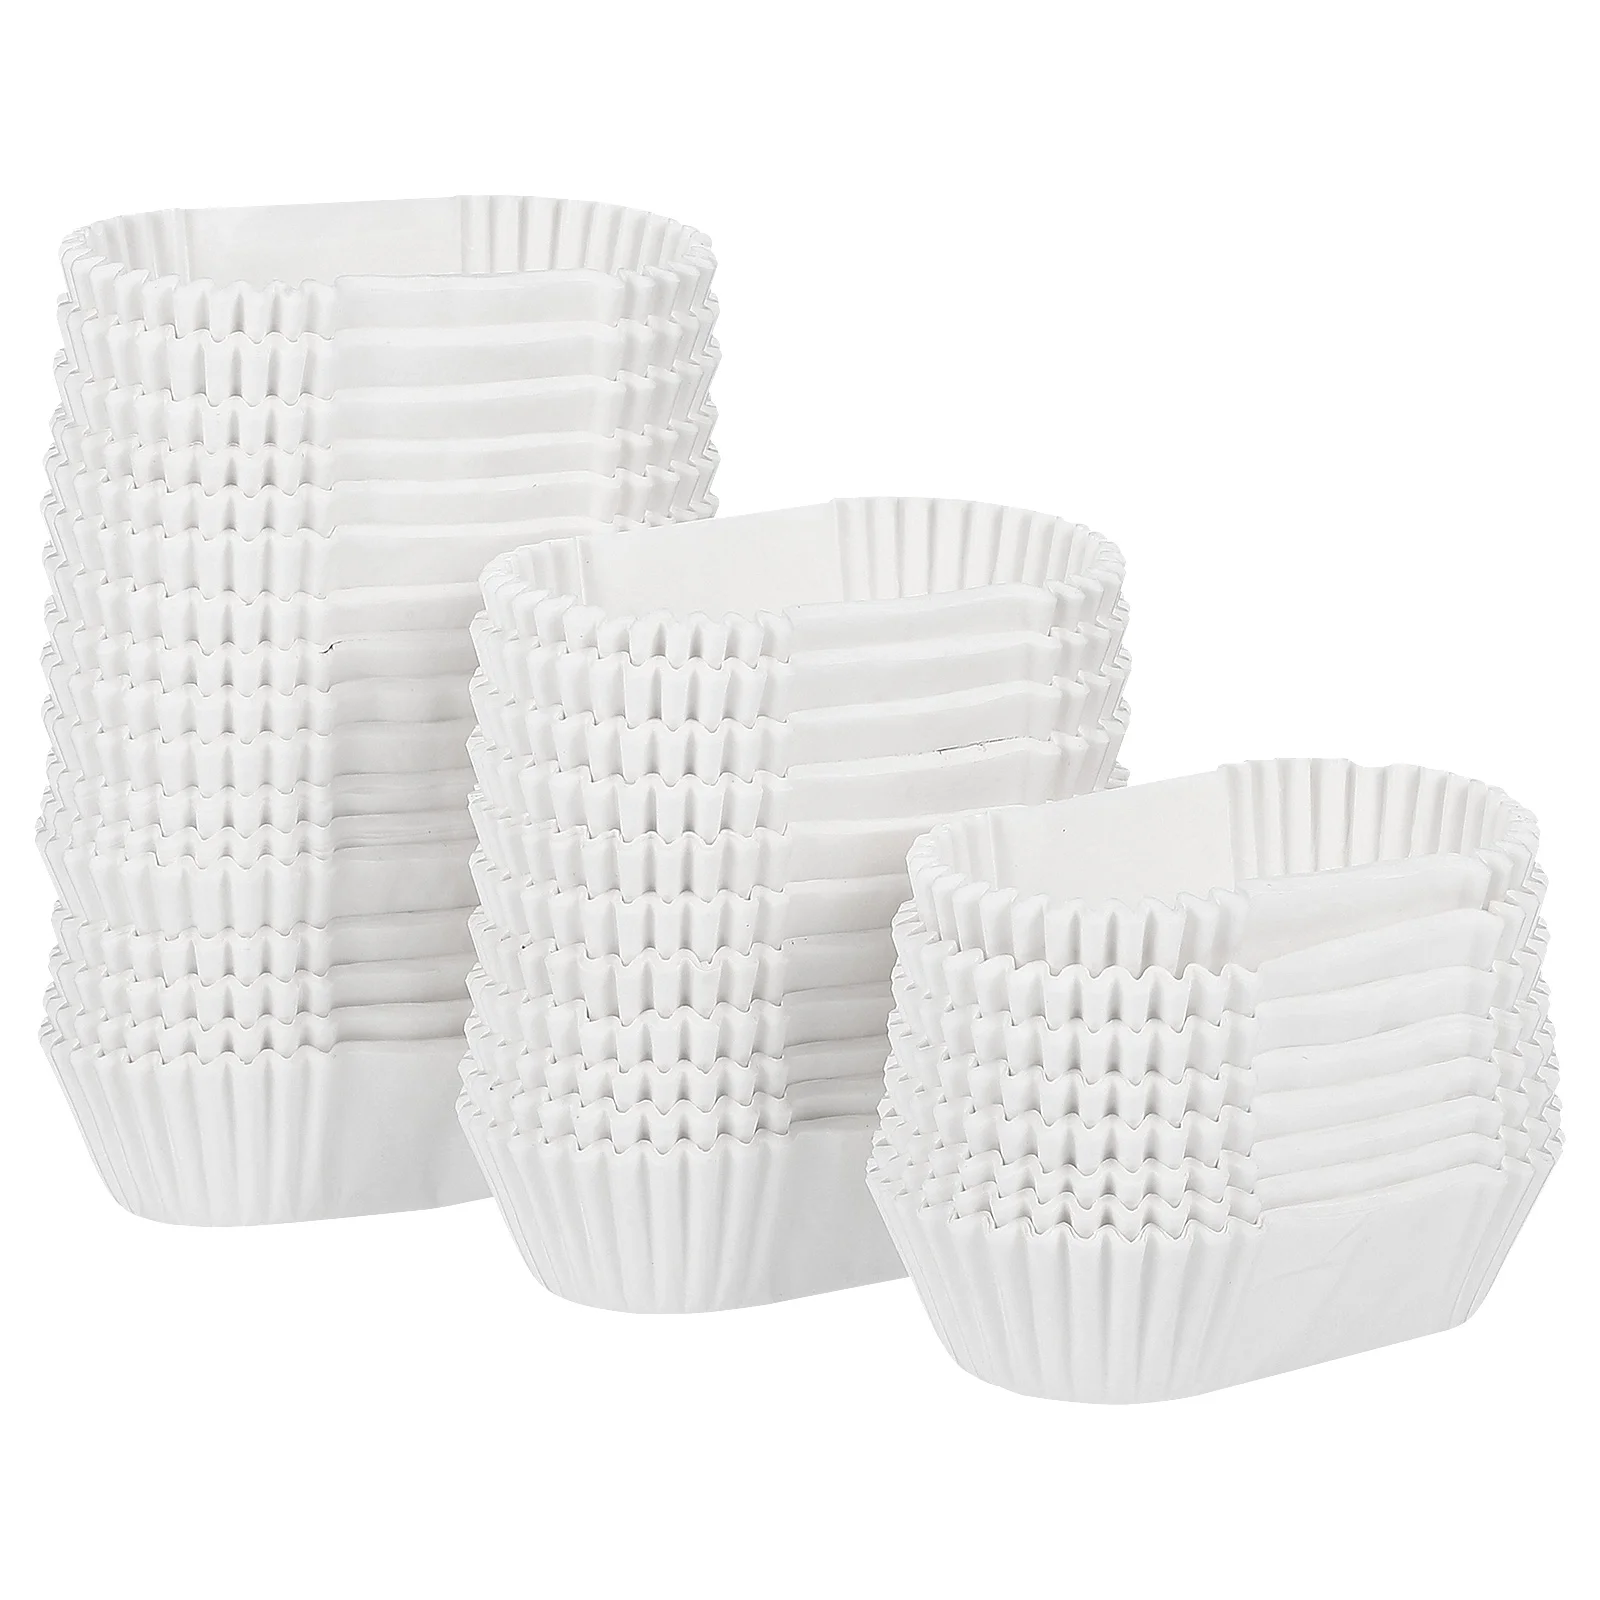 

1000 Pcs Mini Loaf Pans Oval Cake Paper Cup Baking Cups Wrapping Grease Proof Cupcake Liners Wraps Bread Tray